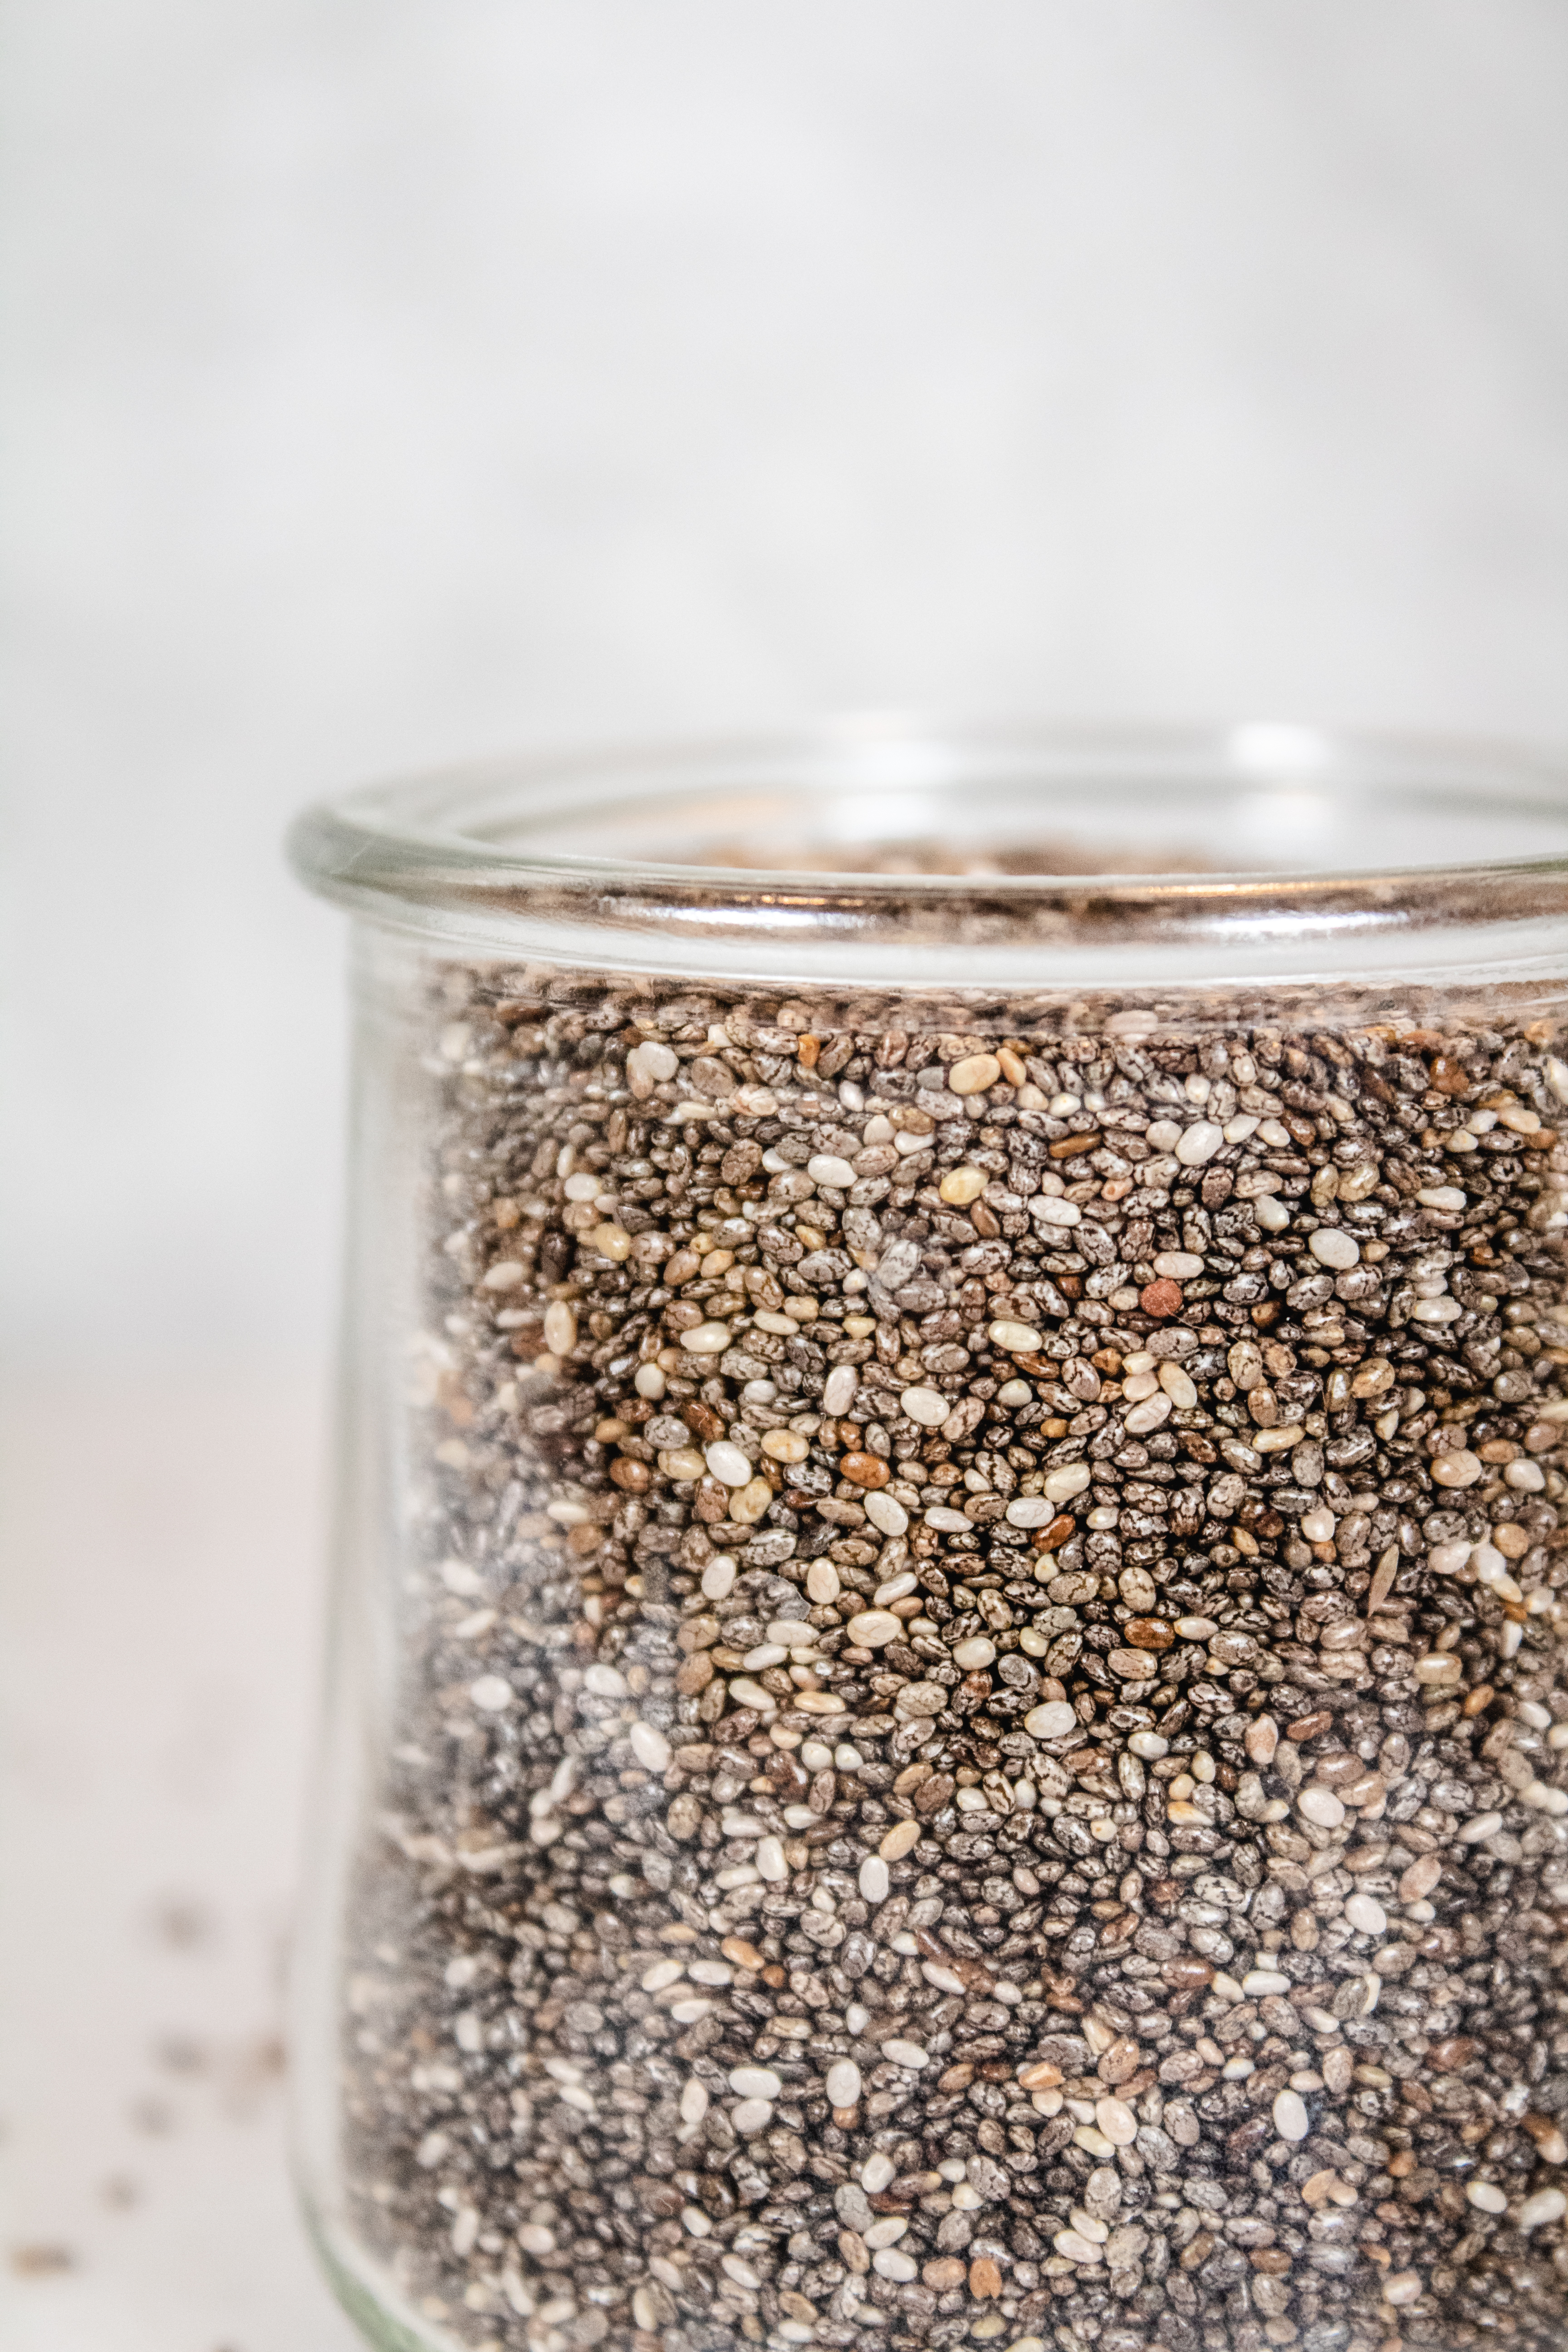 CHIA SEEDS IN A GLASS JAR